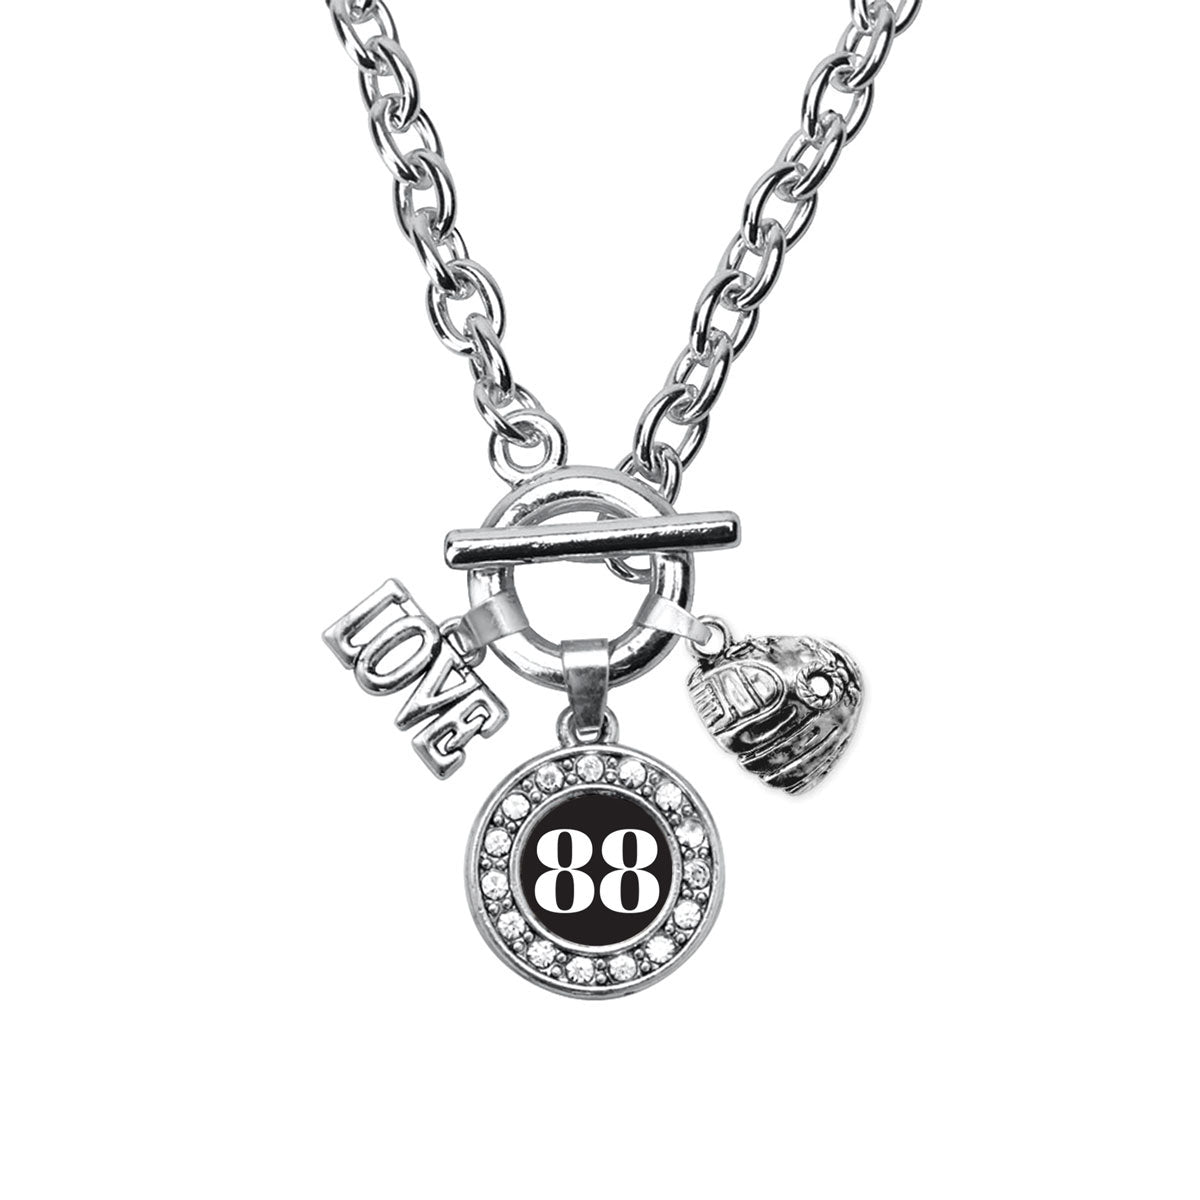 Silver Baseball Glove - Sports Number 88 Circle Charm Toggle Necklace